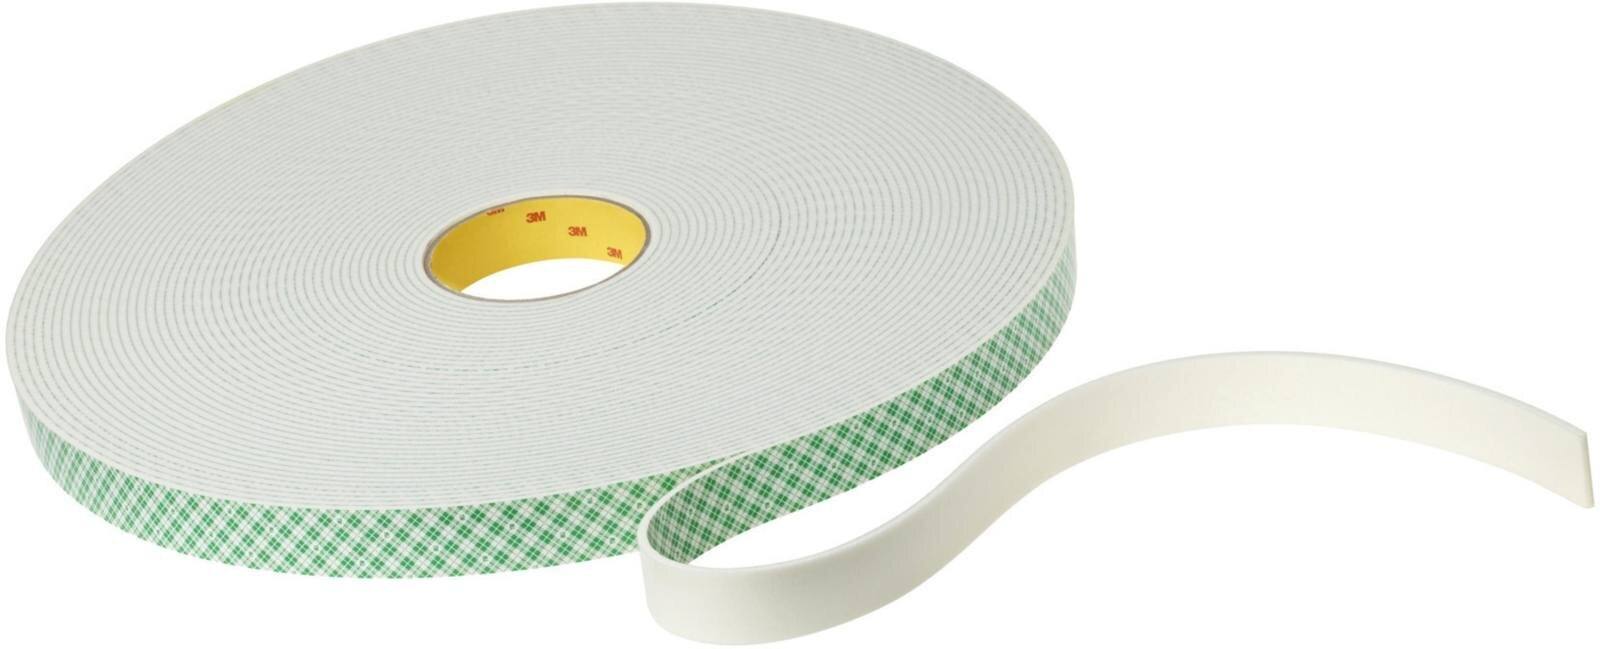 3M PU foam adhesive tape with acrylic adhesive 4008, beige, 19 mm x 33 m, 3.2 mm